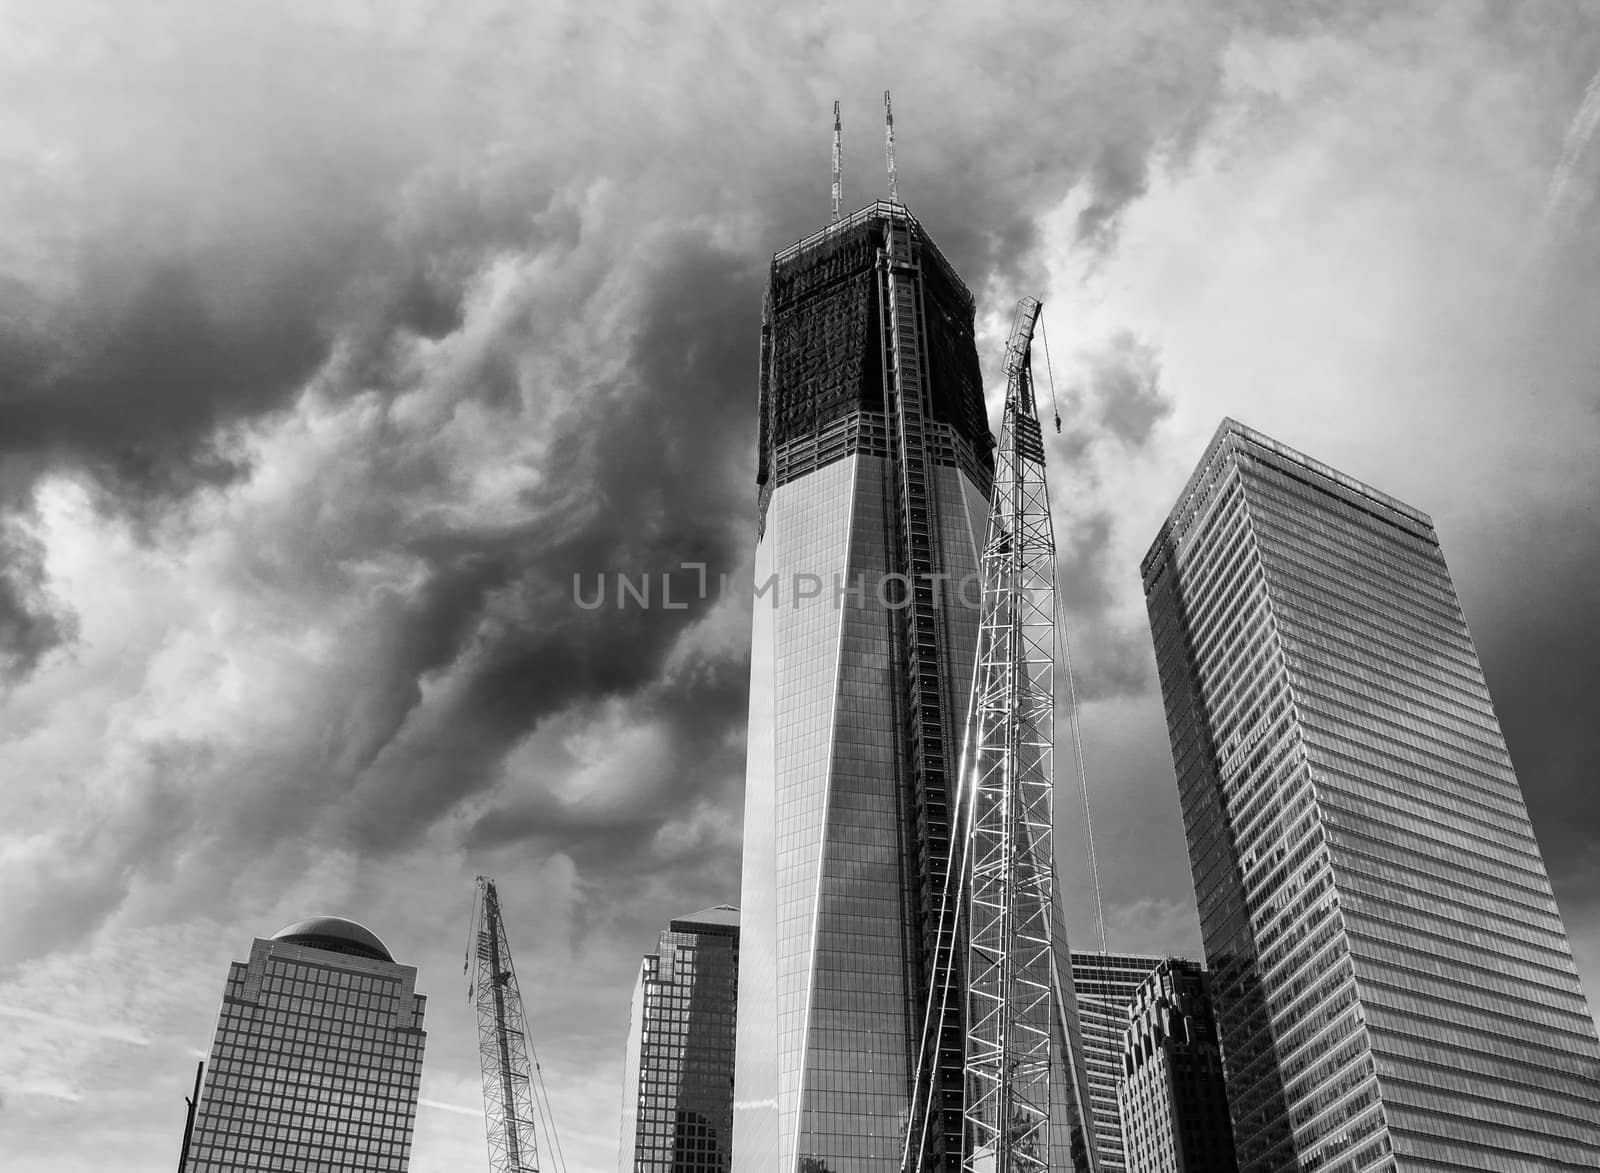 Buildings and Skyscrapers of Manhattan with Dramatic Sky, U.S.A.